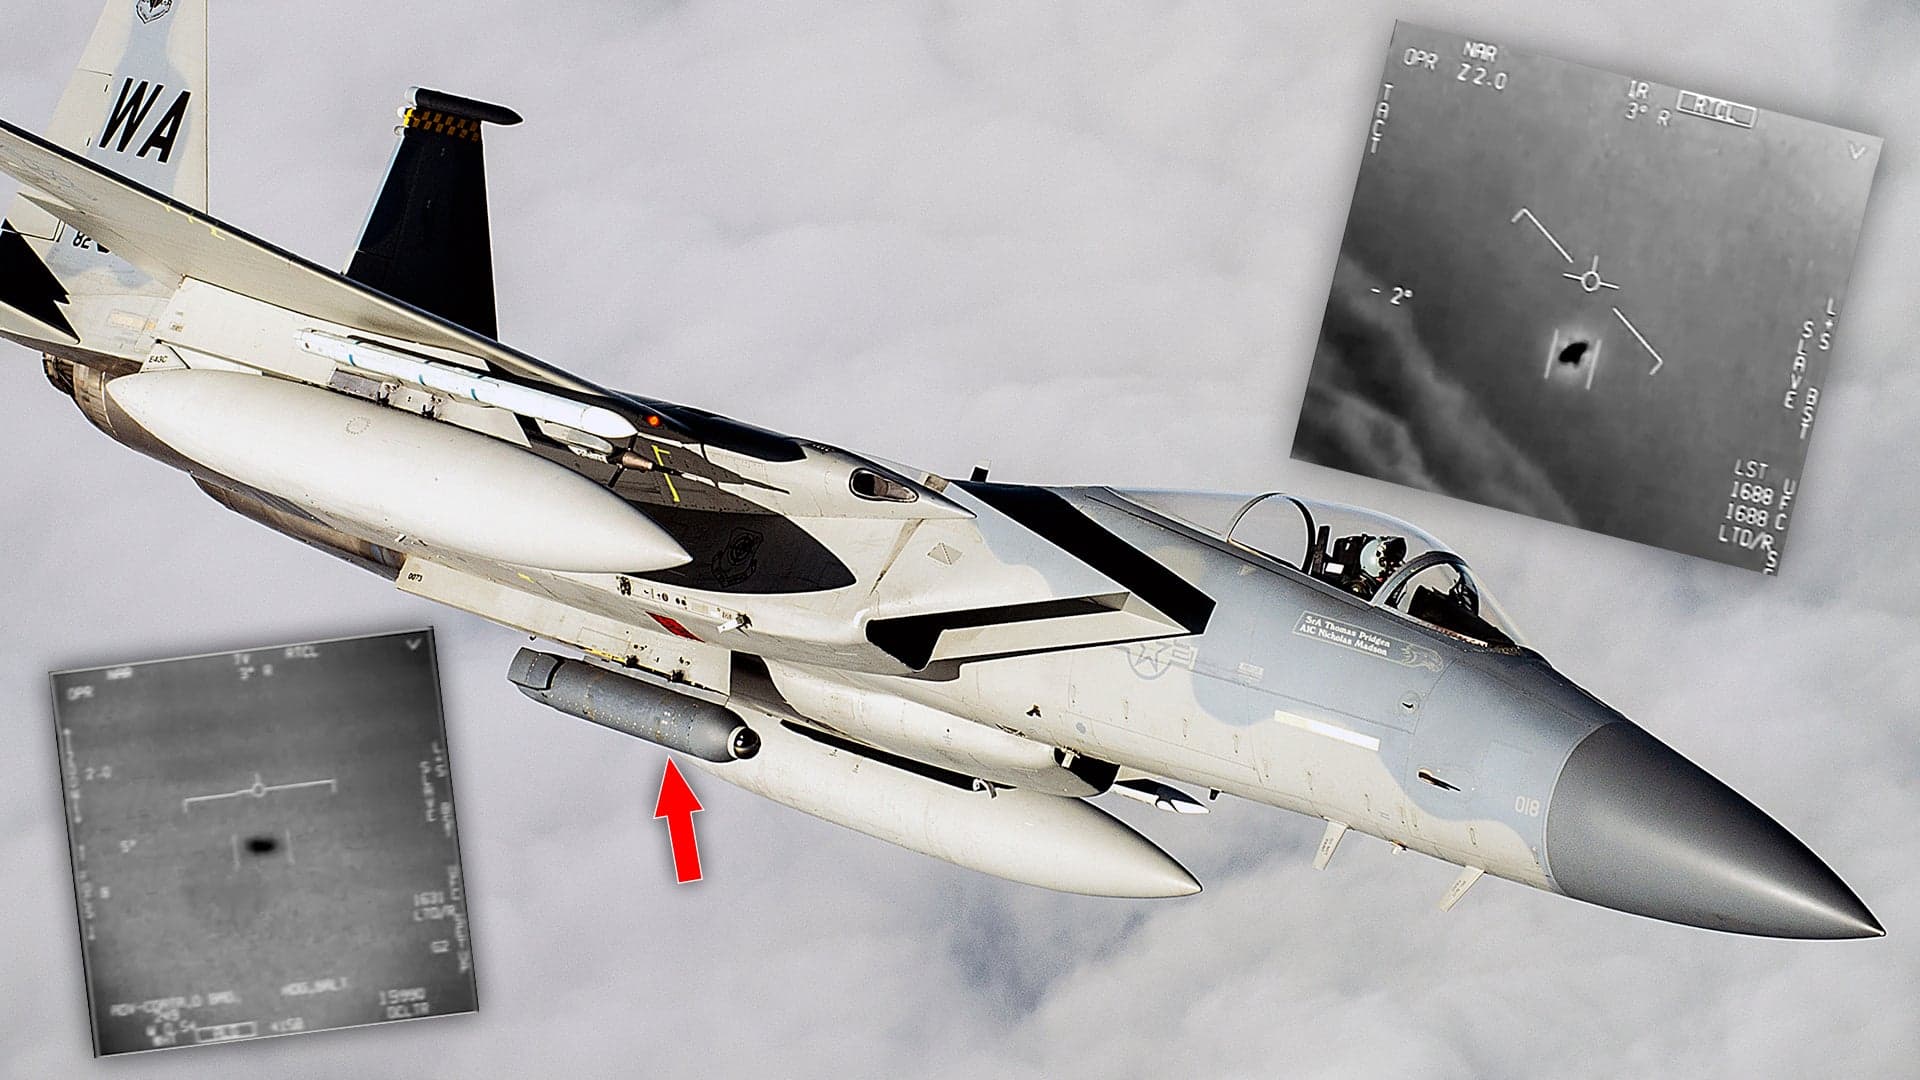 U.S. Fighter Jets Are About To Get Infrared Sensors That Could Be Huge For UFO Reporting